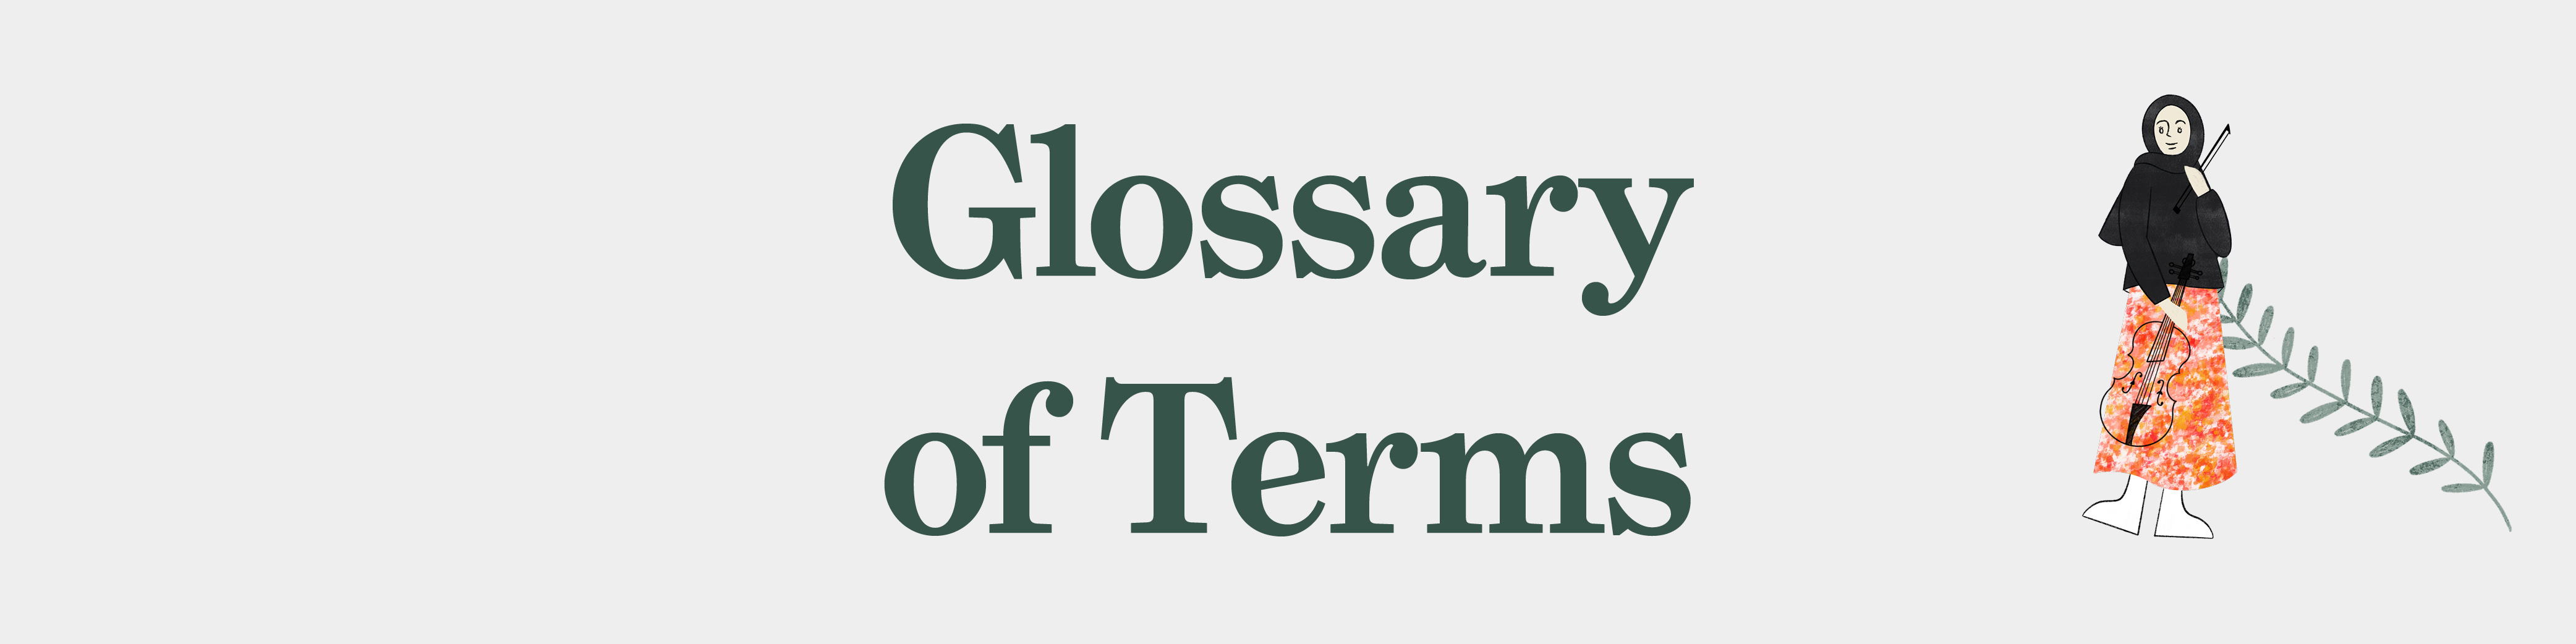 Download the glossary of terms